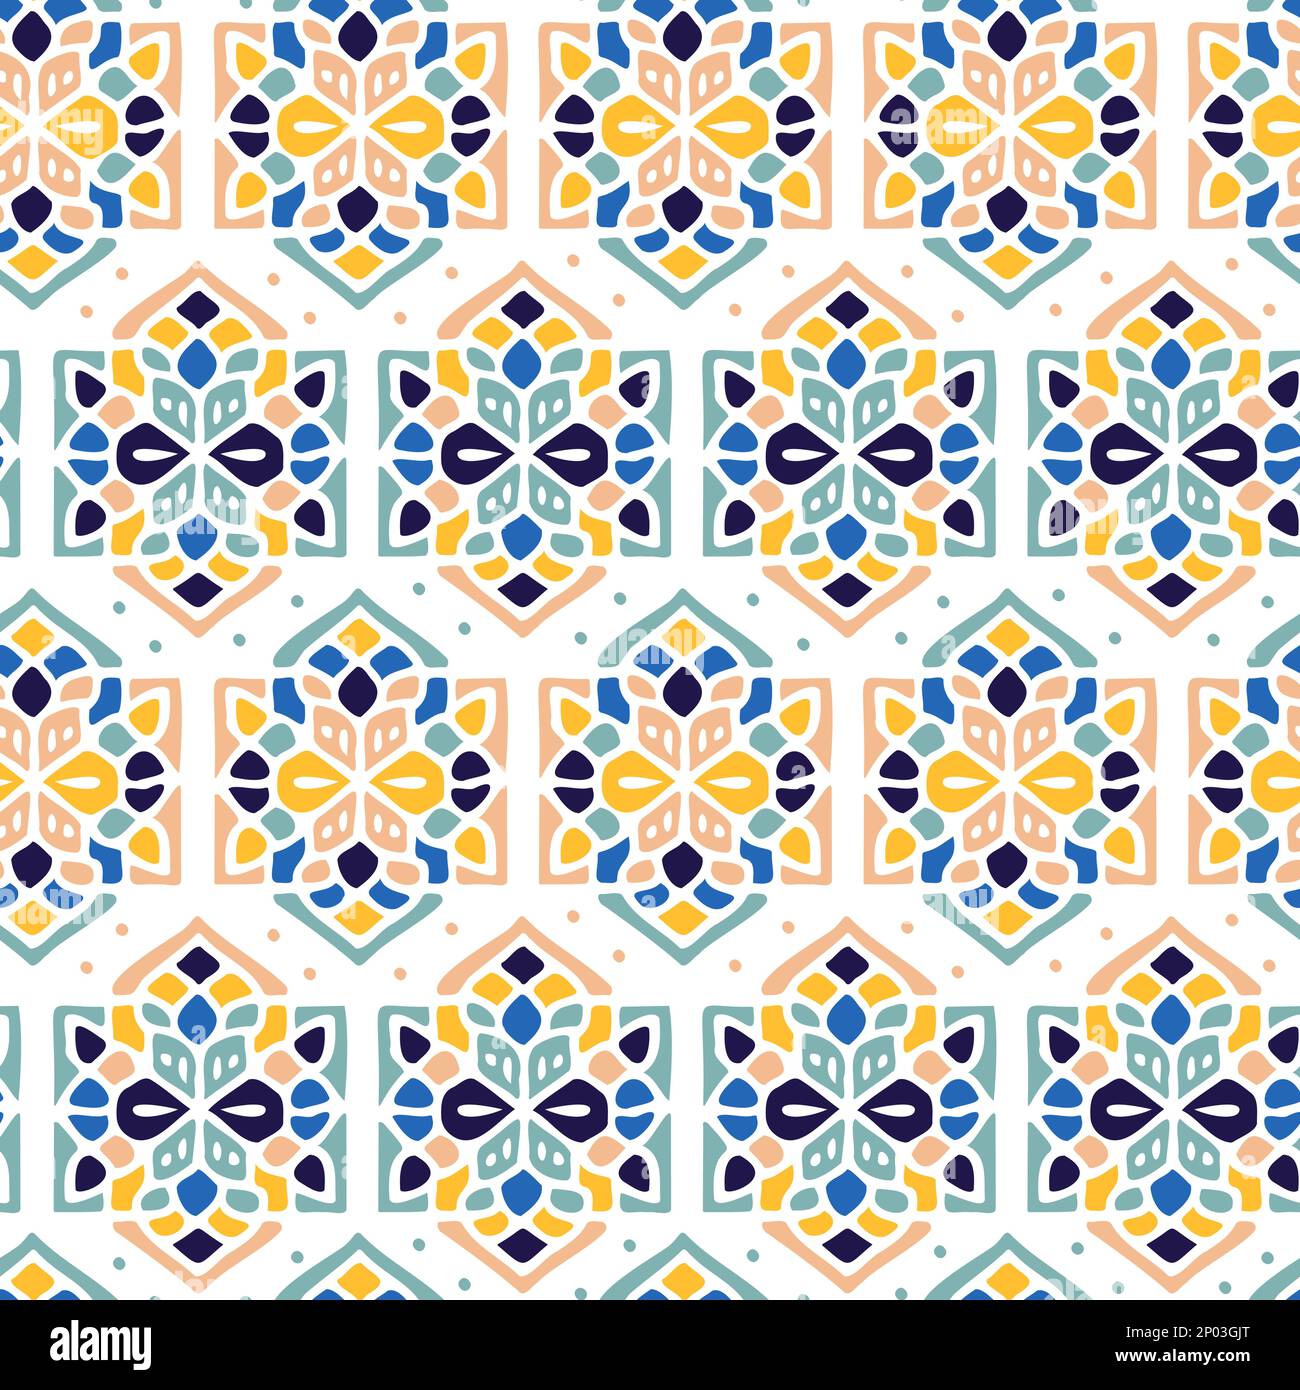 Vector Retro or Traditional Portuguese or Moroccan Style Flooring Tiles Seamless Surface Pattern for Background, Products or Wrapping Paper Prints. Stock Vector